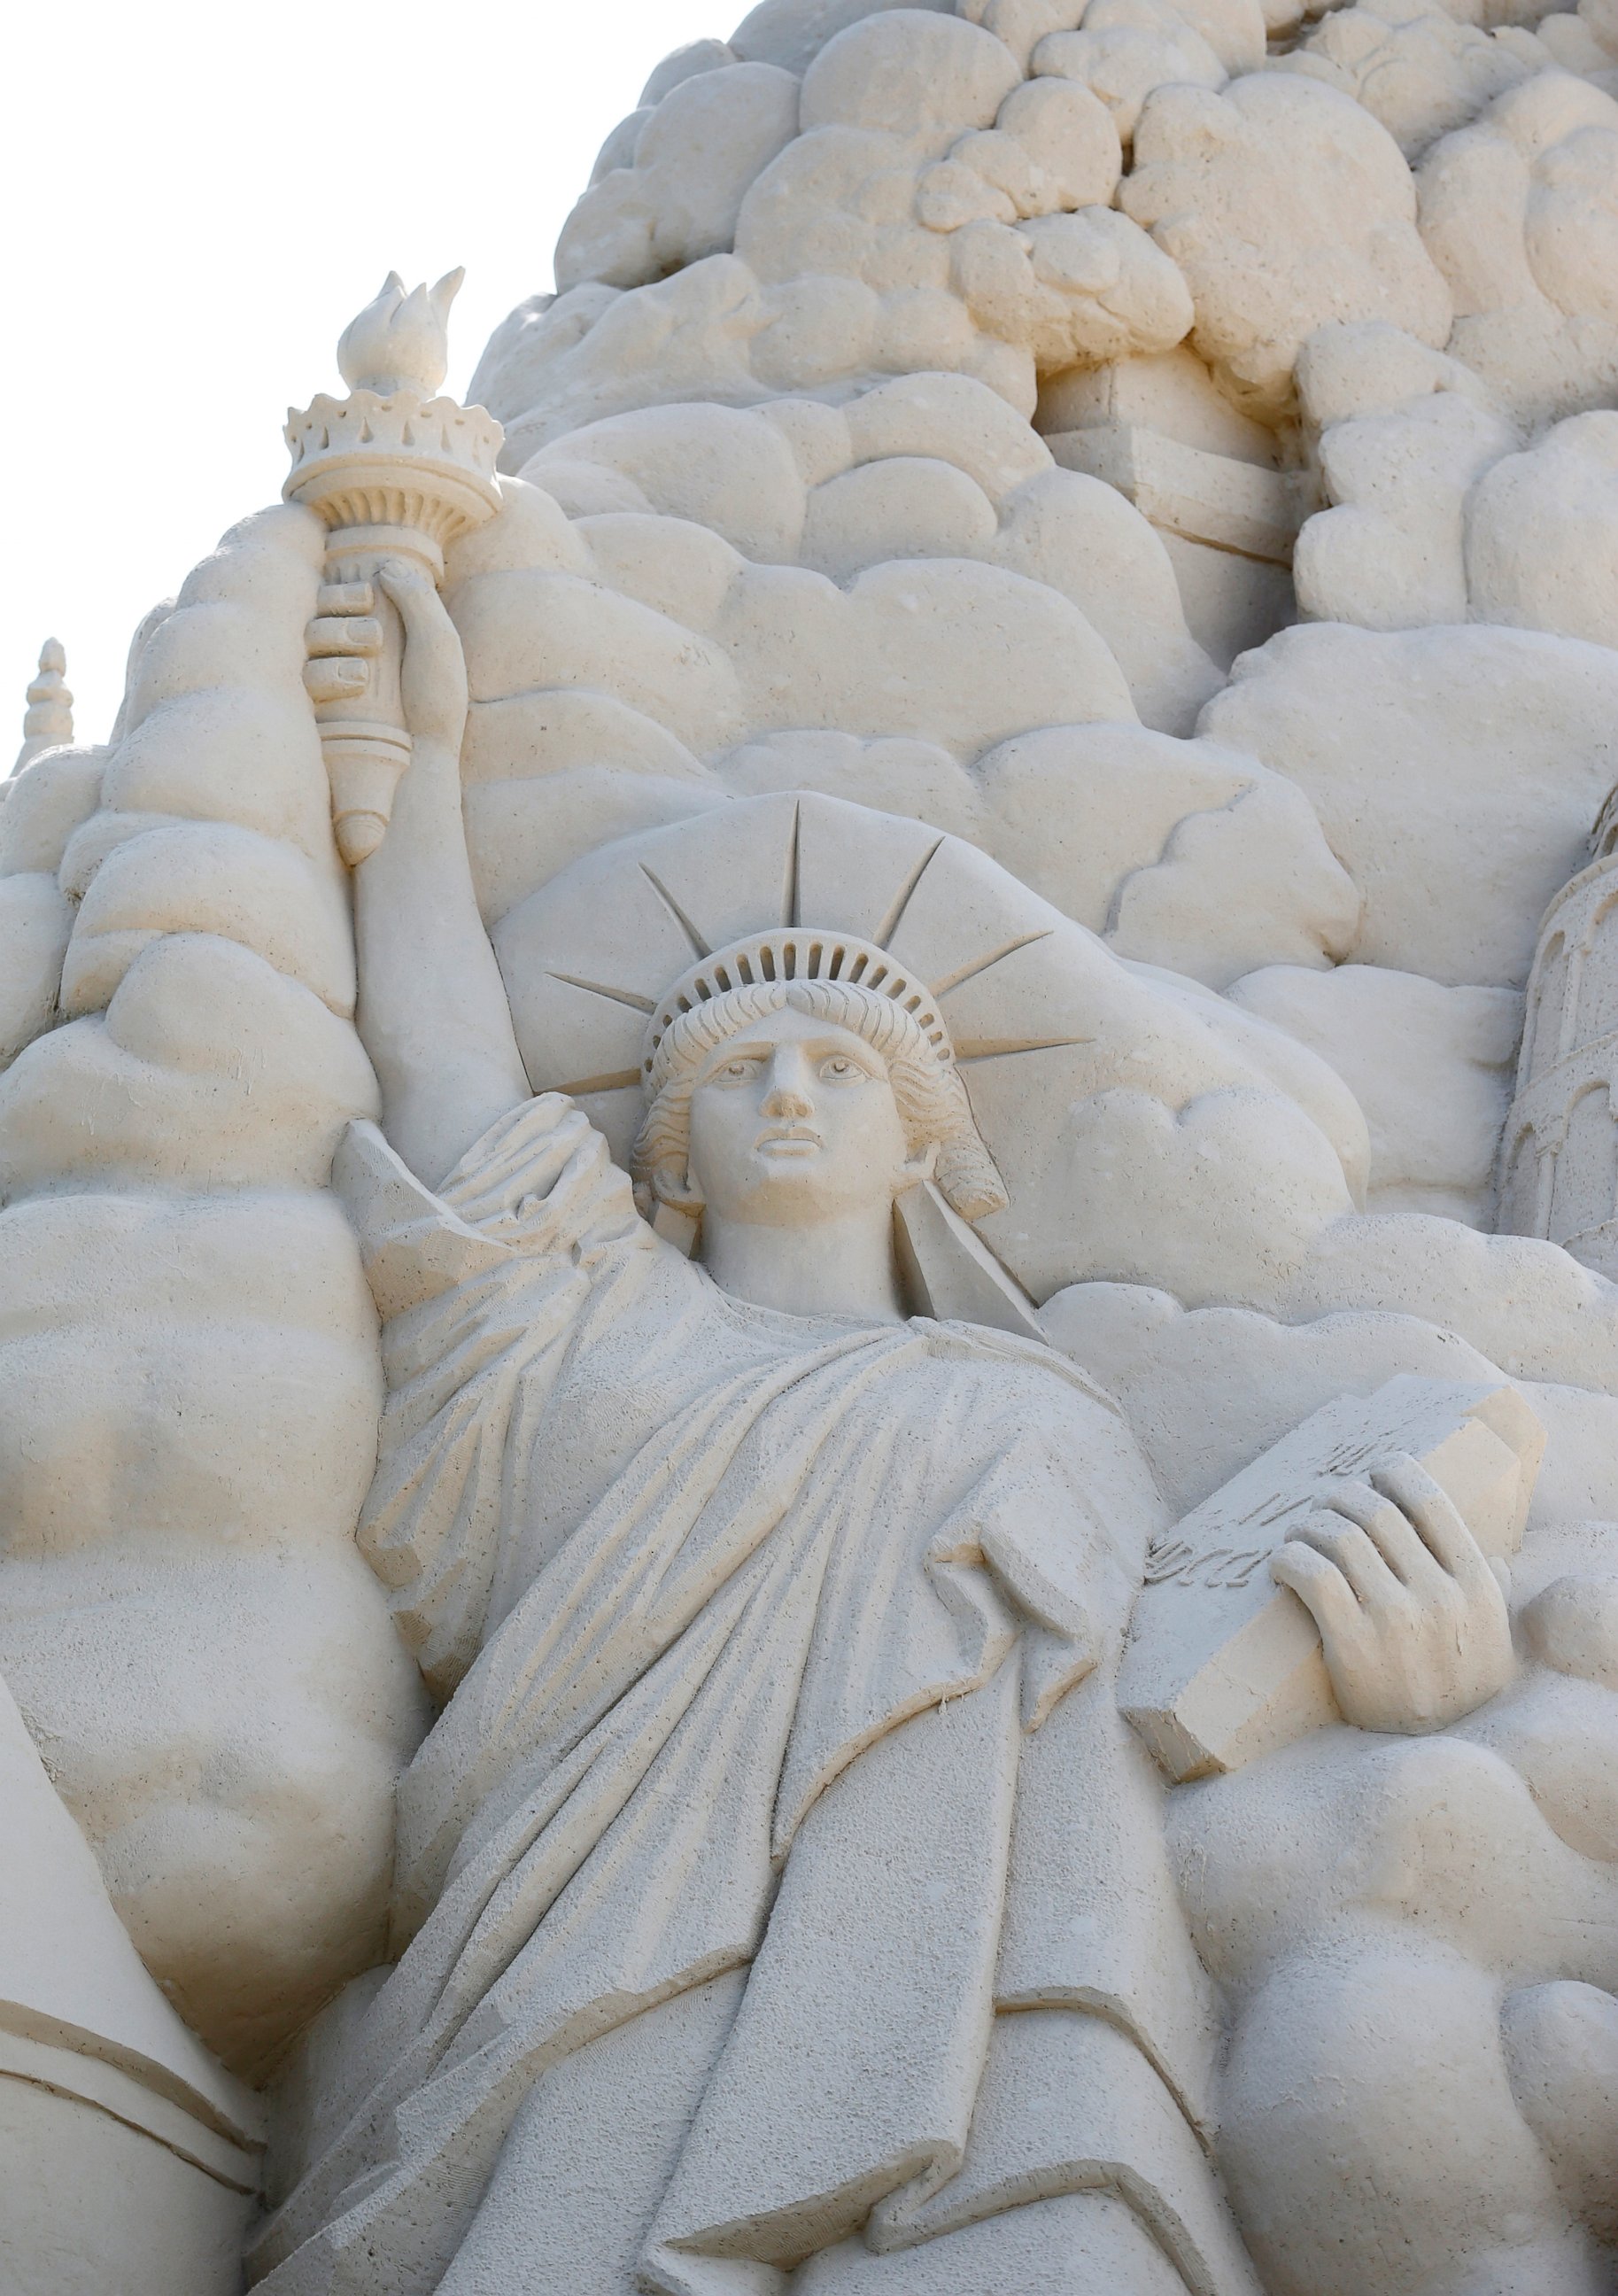 PHOTO: A detail of the Statue of Liberty is carved into the side of a sand castle, built in a record attempt for the tallest sand castle, is Monday, Oct. 26, 2015, on Virginia Key Beach in Miami.